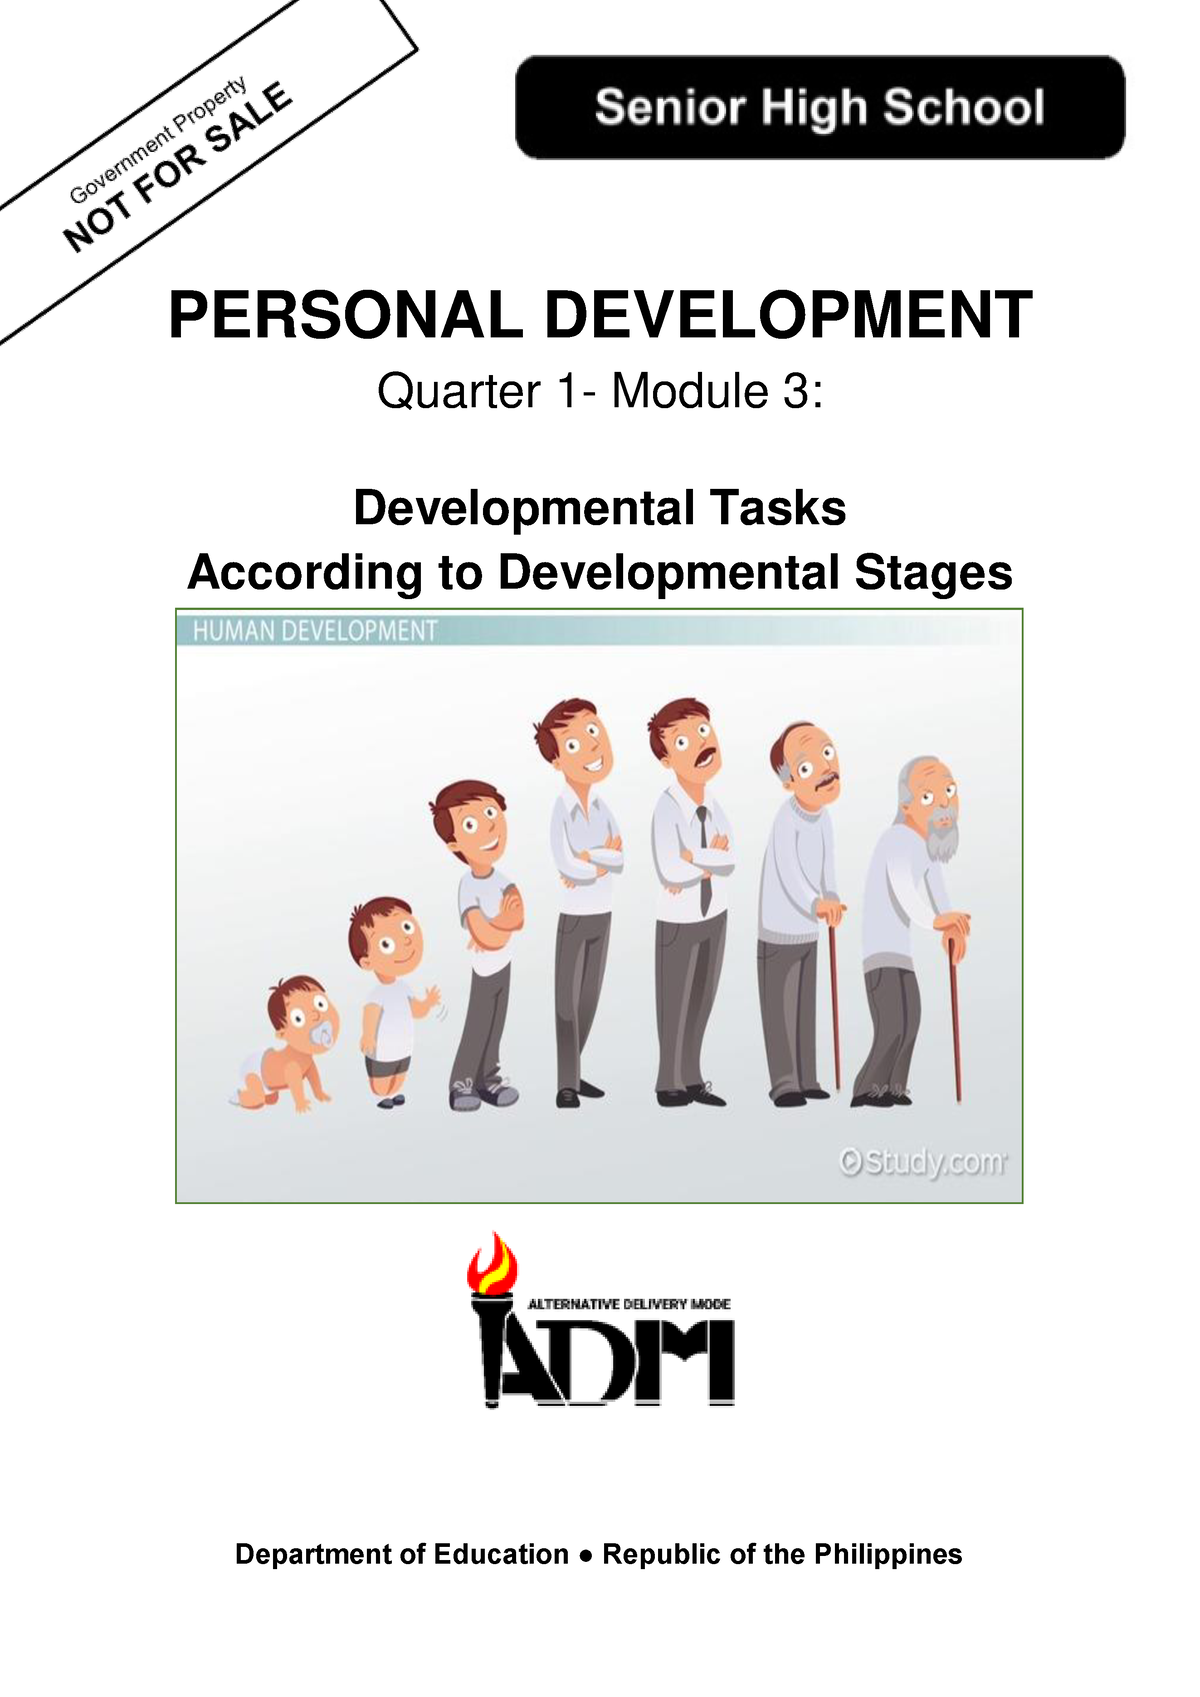 stages of human development according to santrock